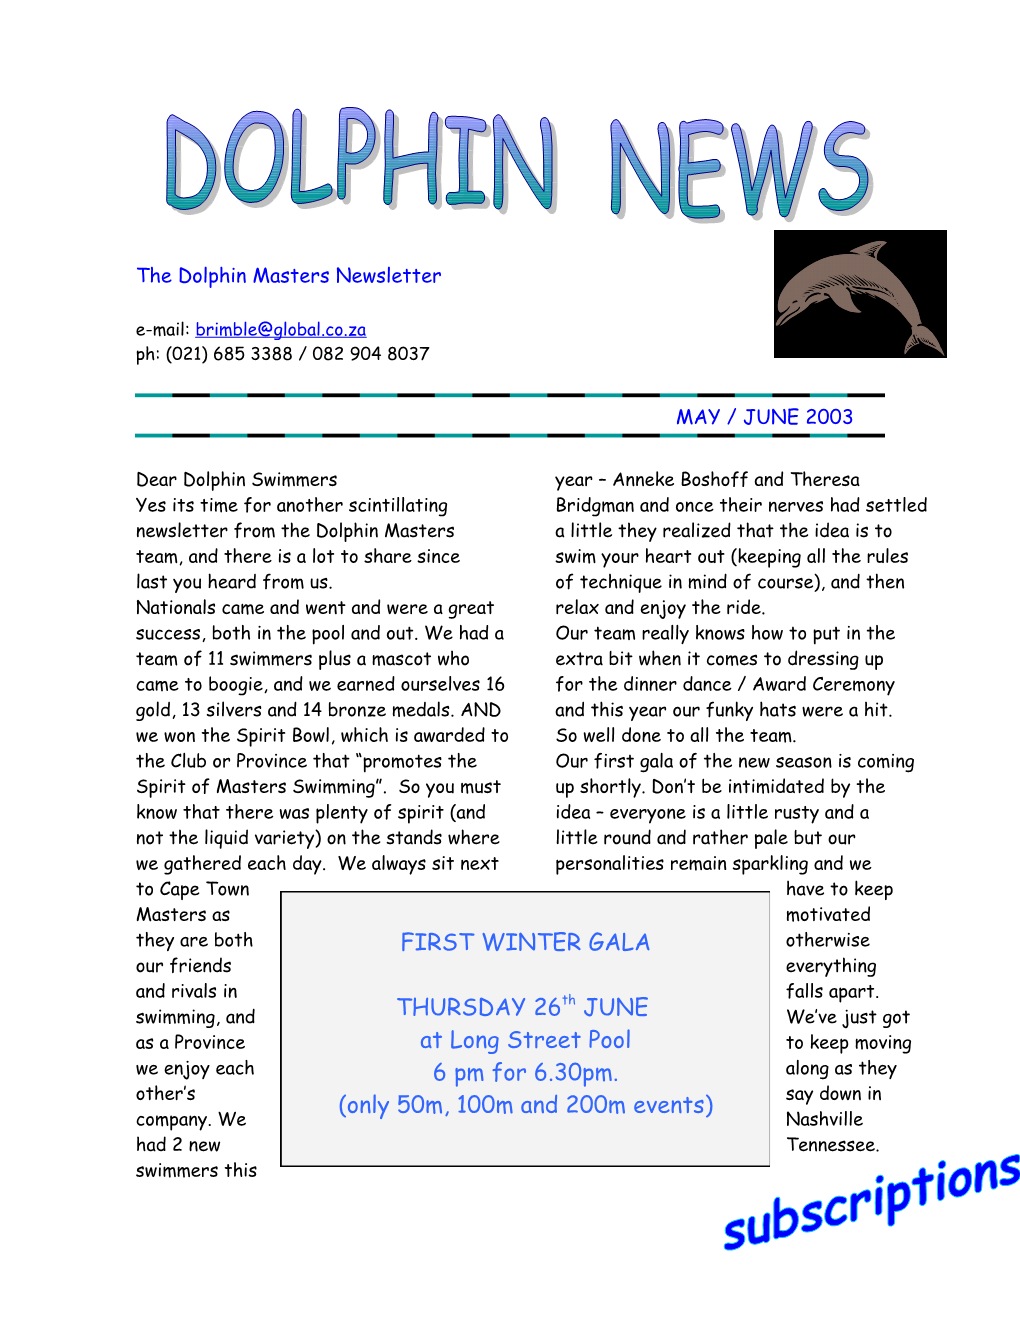 The Dolphin Masters Newsletter